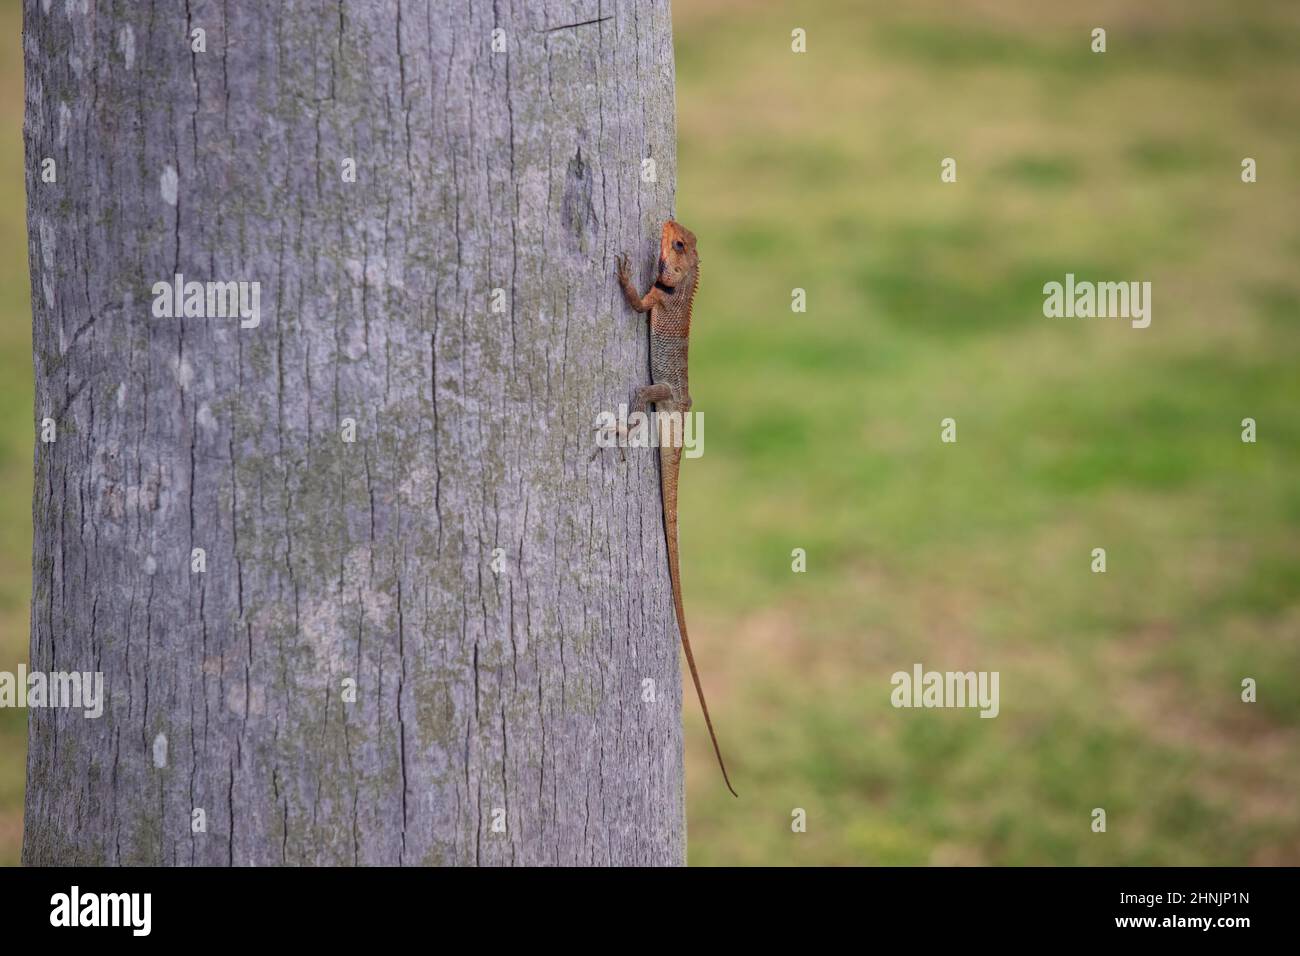 Close up view f a small lizard with a long tail sits on the trunk of a tree, green grass in the background Stock Photo